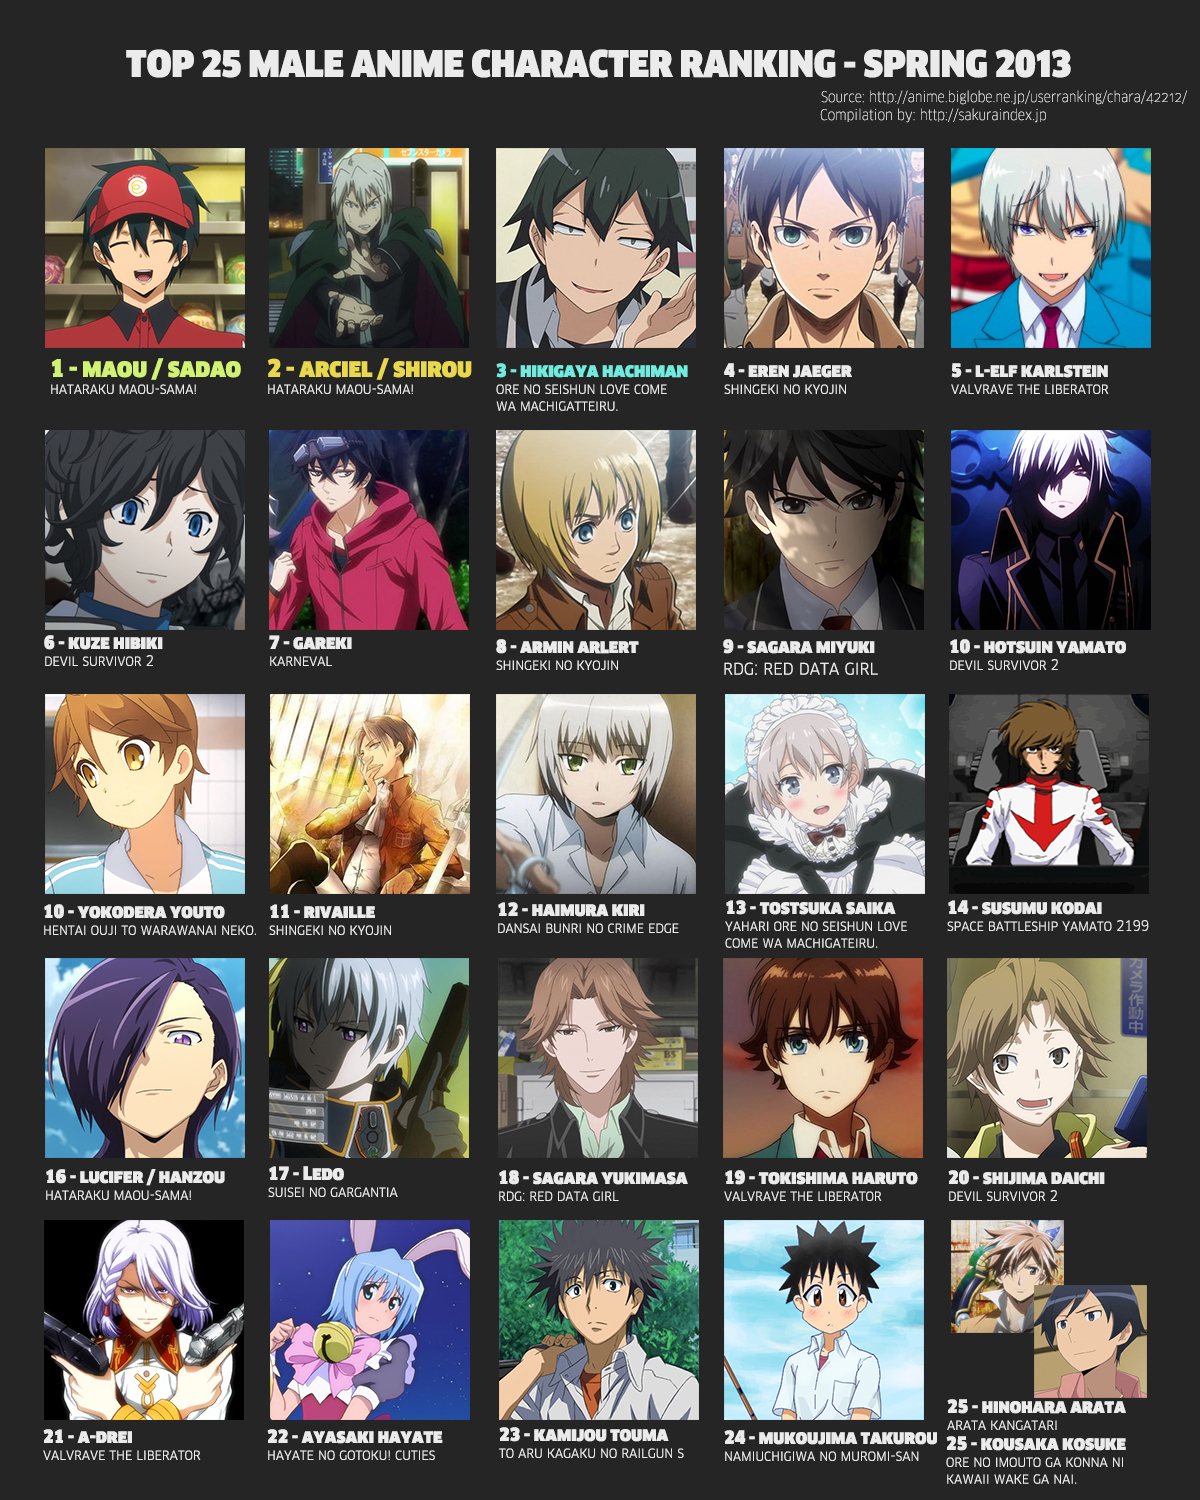 Top 25 Male Anime Character Ranking  Spring 2013  The Chronicle of Otaku